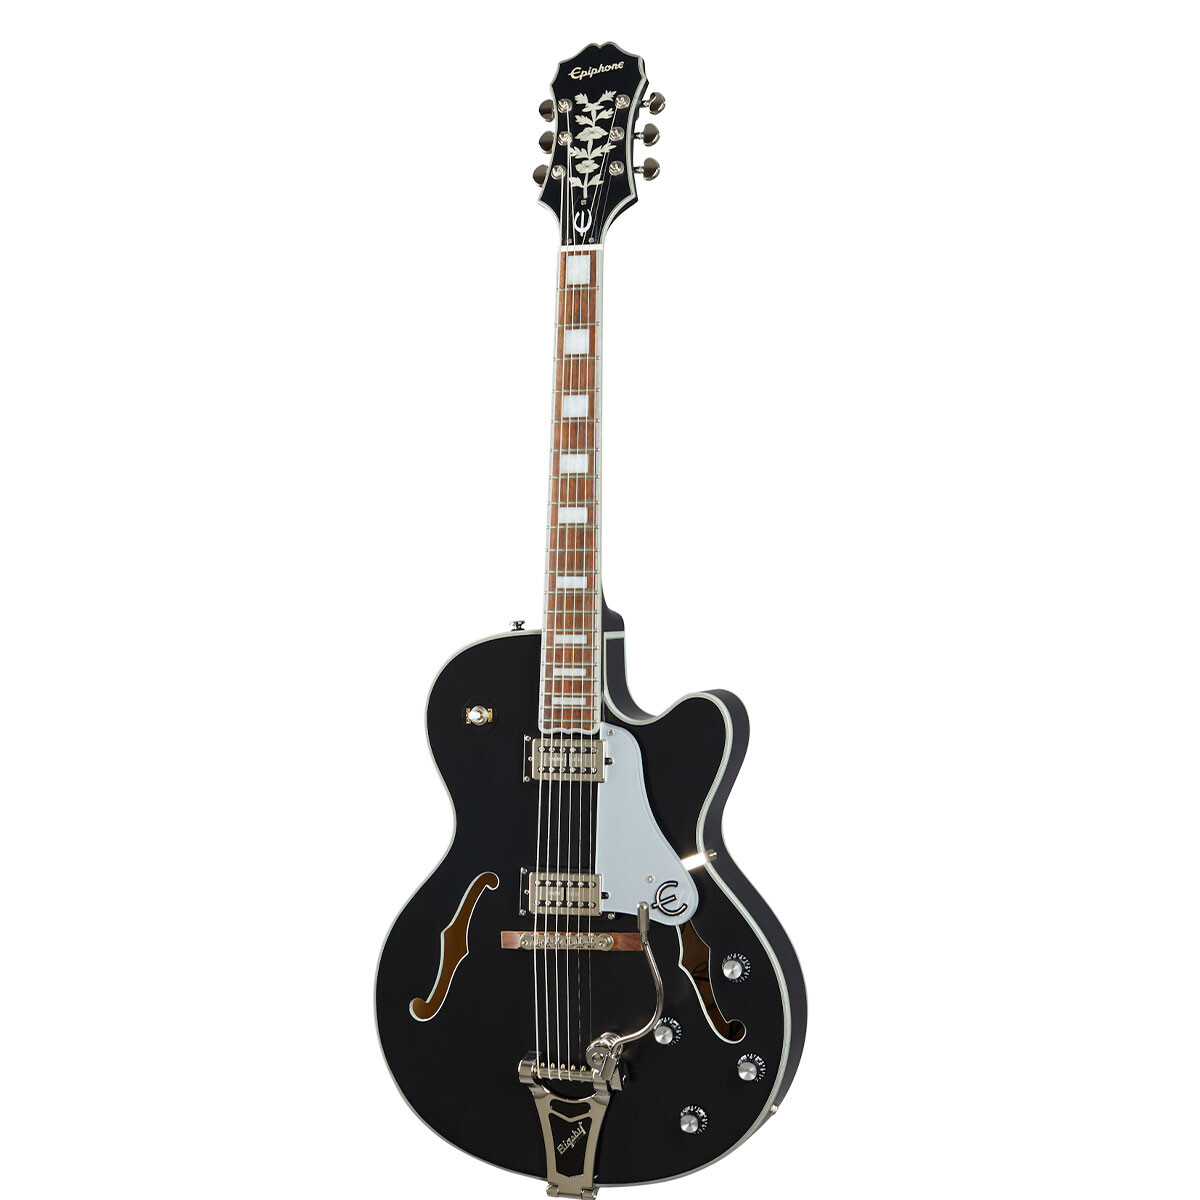 GUITARRA ELECTRICA EPIPHONE EMPEROR SWINGSTER BLACK AGED GLOSS 